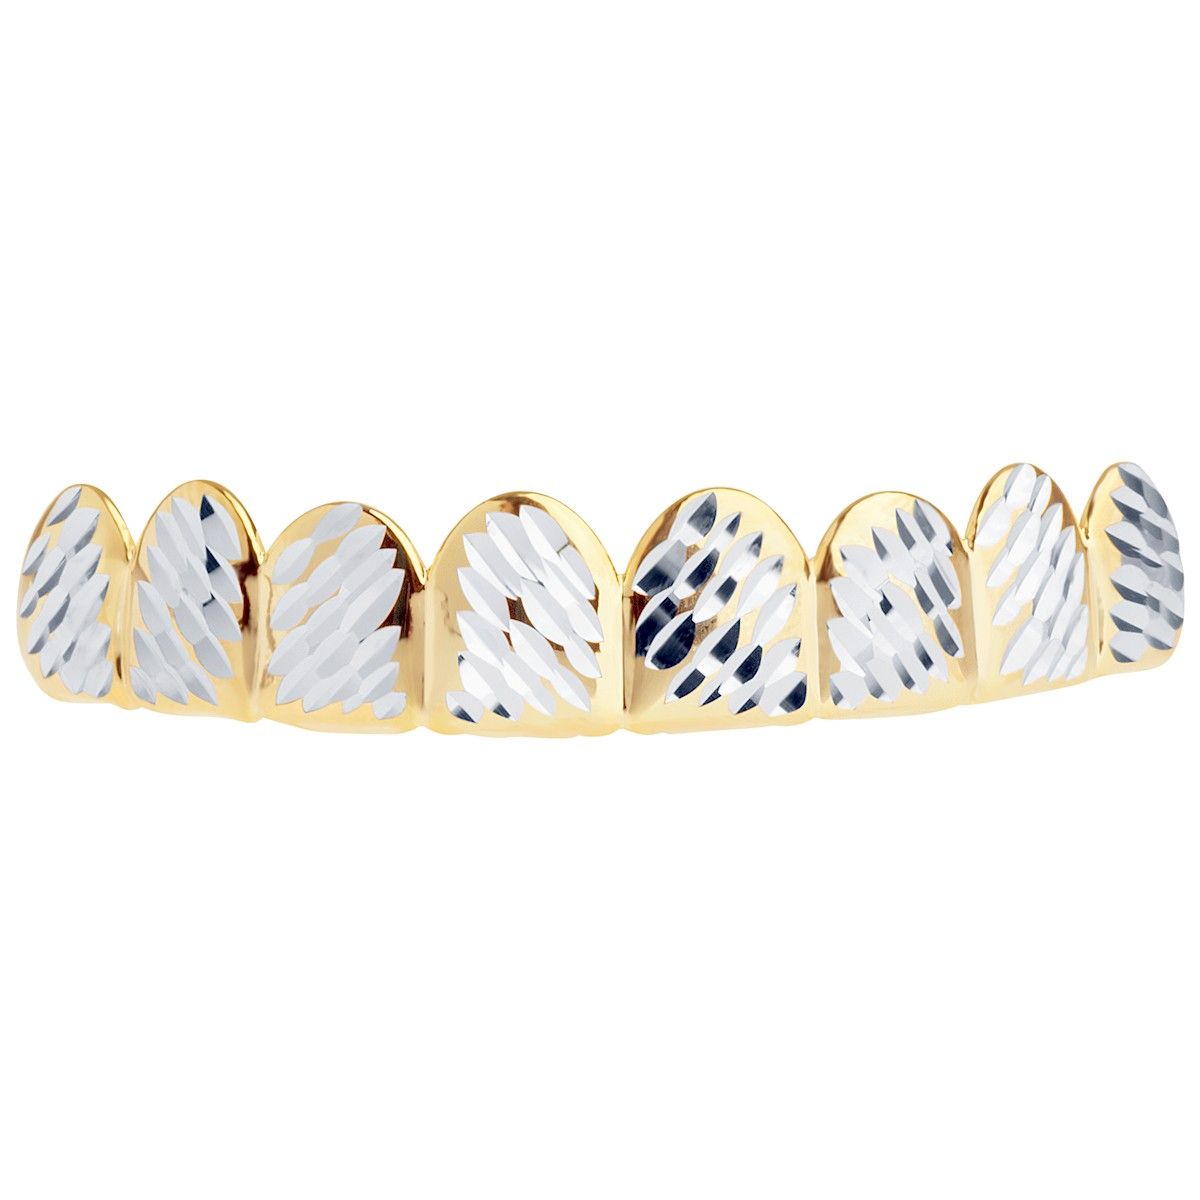 Gold Grillz – One size fits all – Full Size Diamond Cut IV